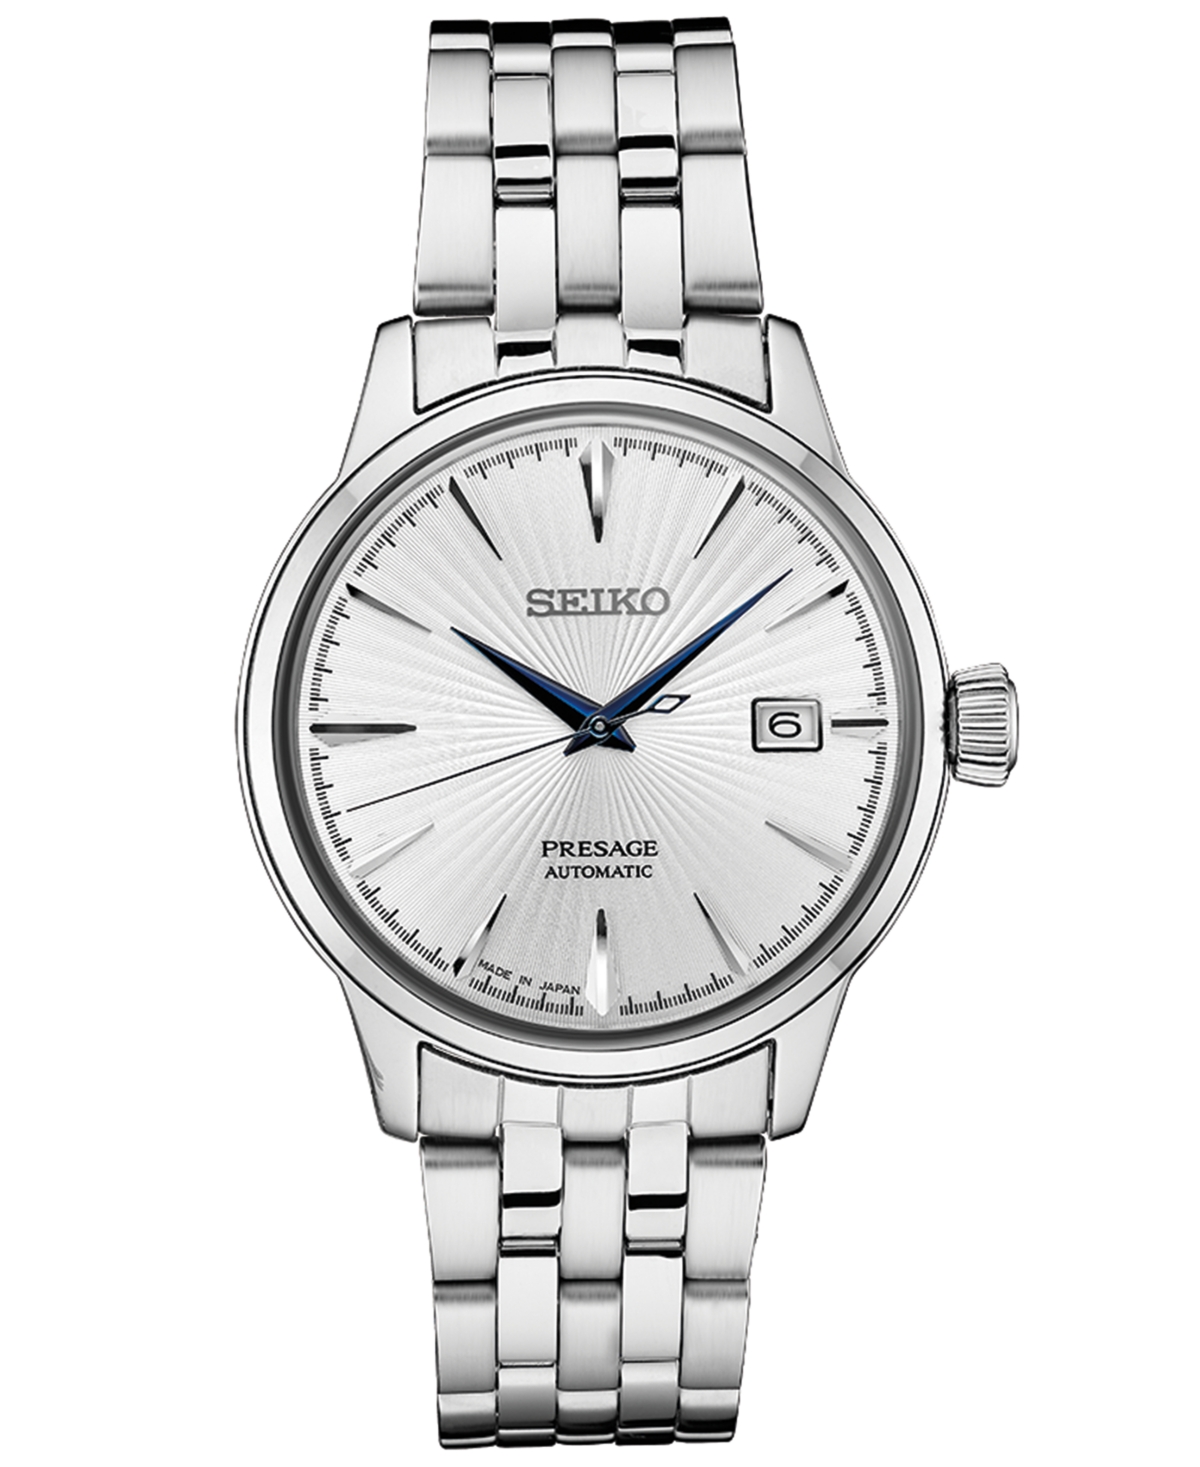 Seiko Men's Automatic Presage Stainless Steel Bracelet Watch  &  Reviews - All Watches - Jewelry & Watches - Macy's